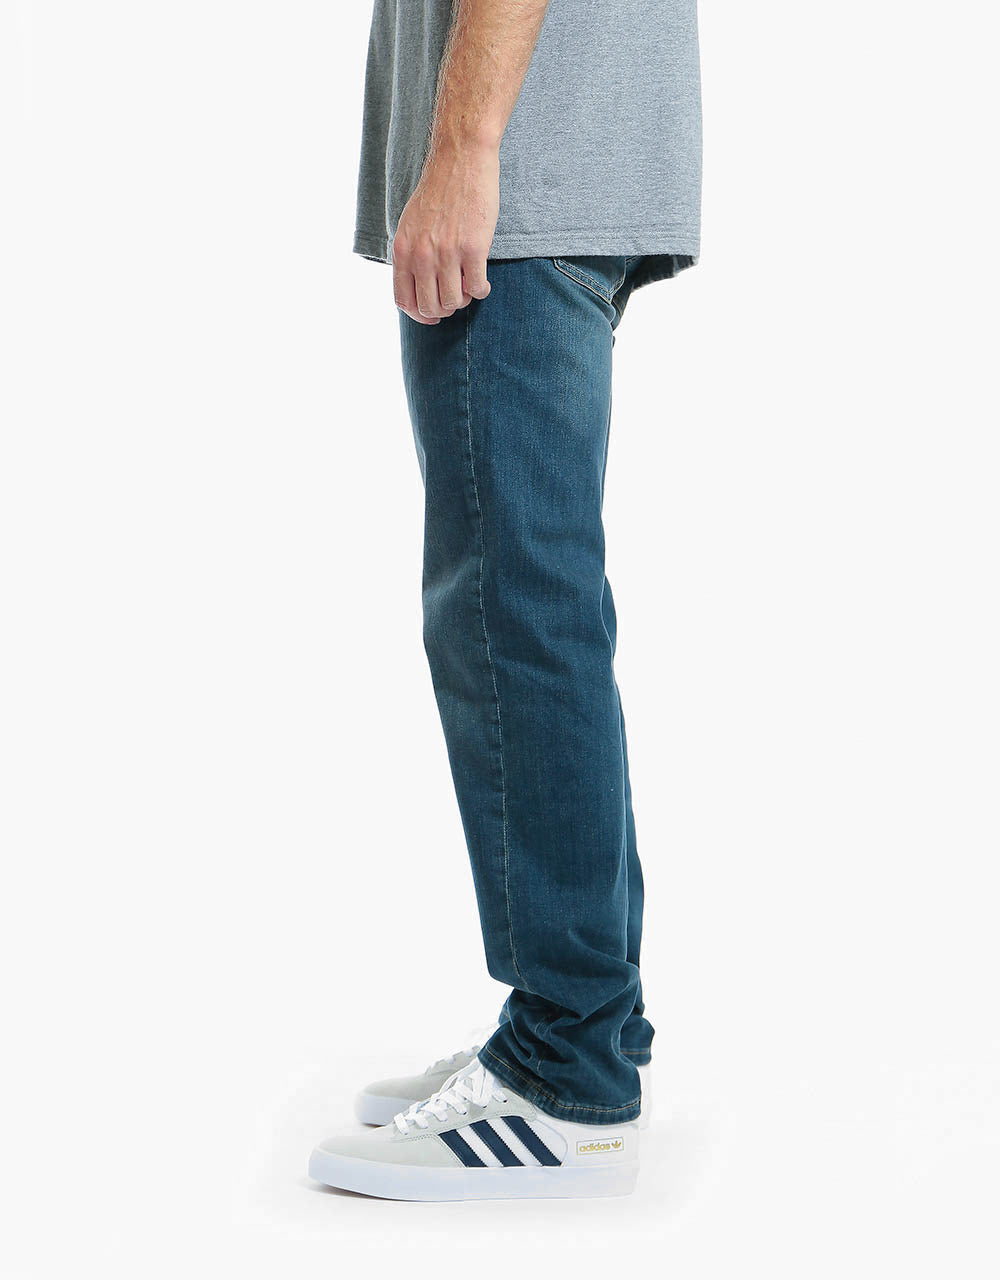 Route One Relaxed Denim Jeans - Mid Wash